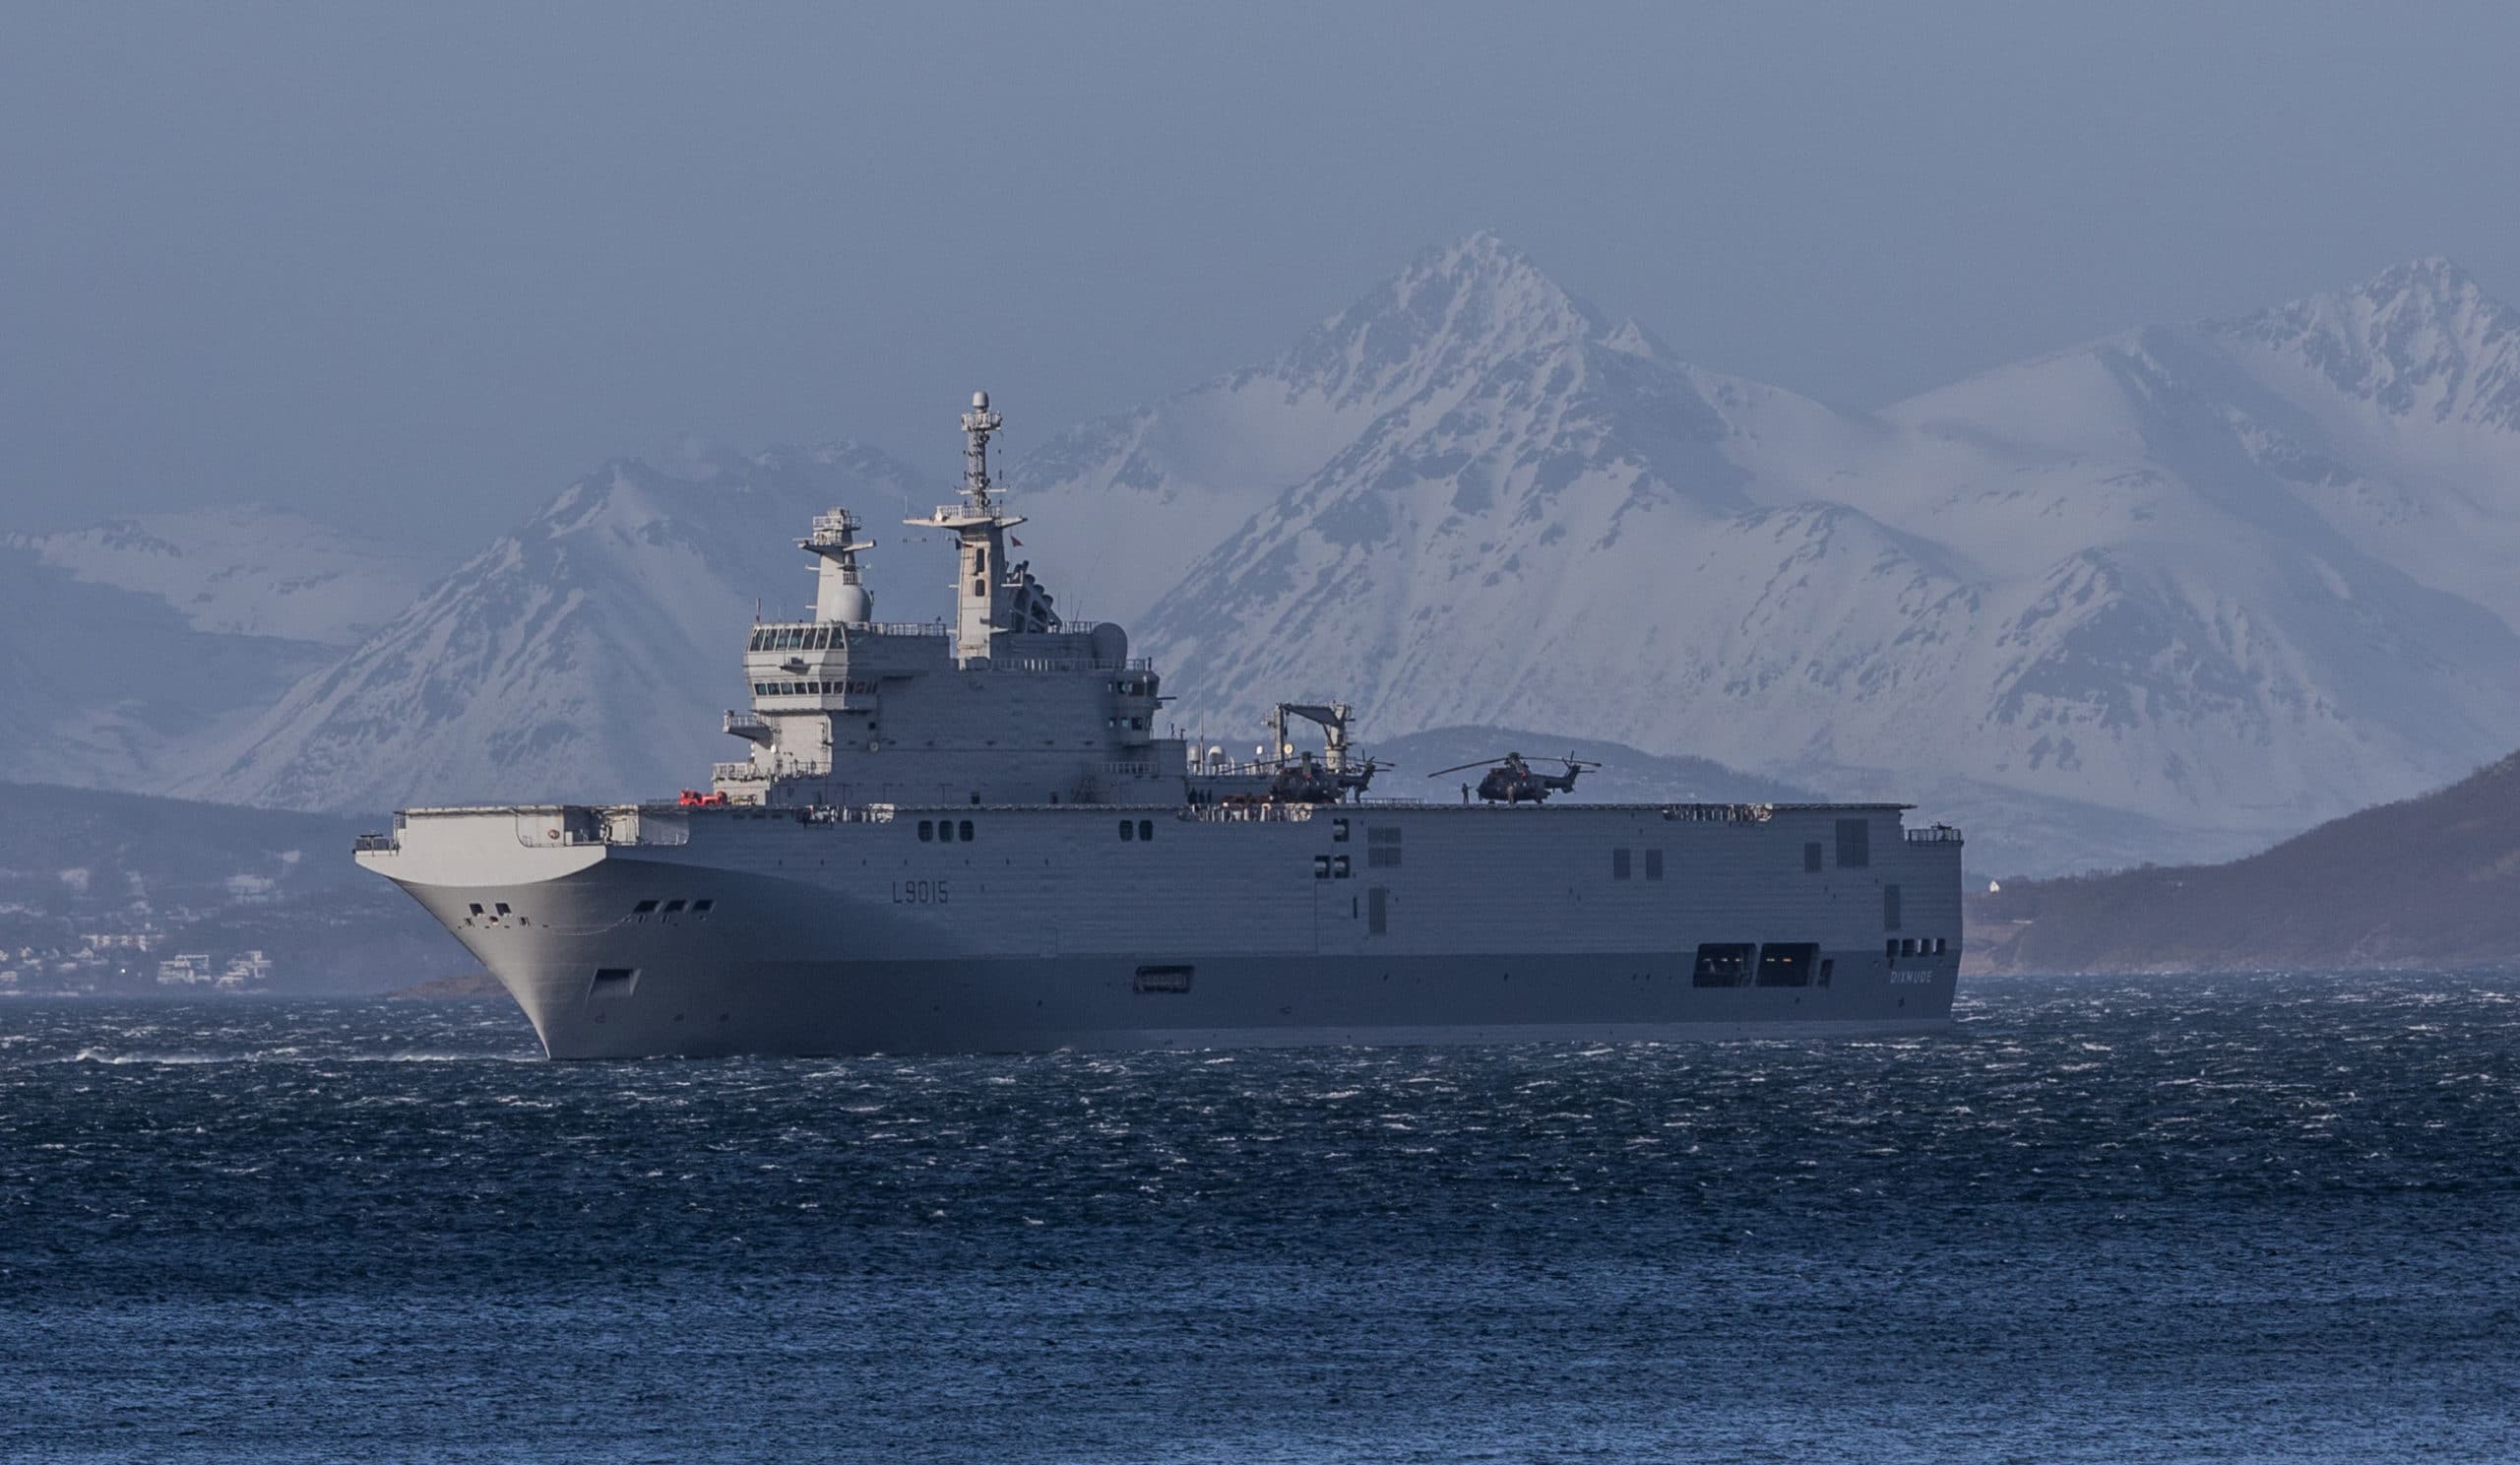 French amphibious assault ship Dixmude sailing through Arctic waters with snowy mountains in the back